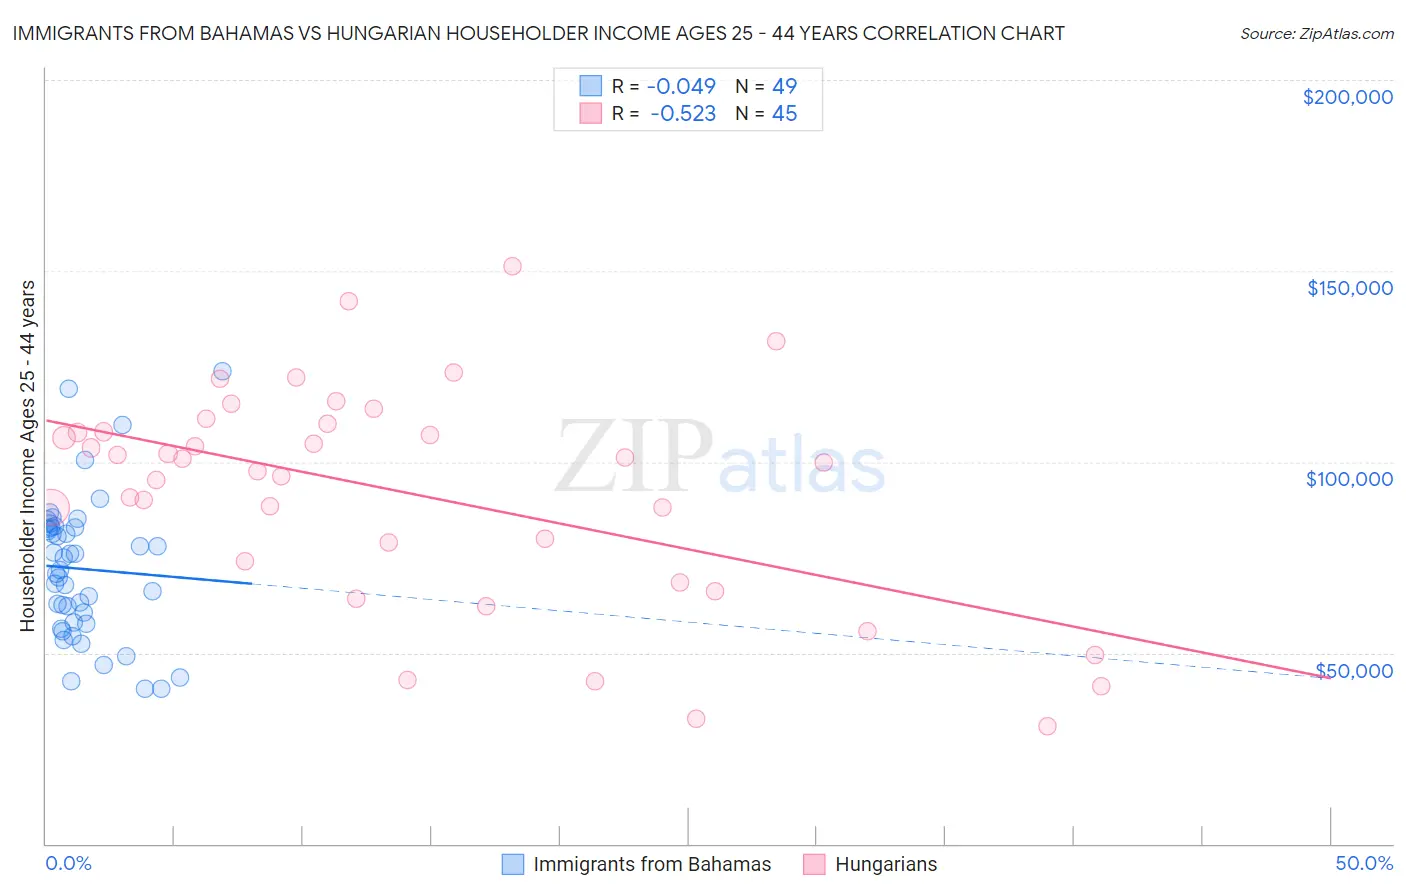 Immigrants from Bahamas vs Hungarian Householder Income Ages 25 - 44 years